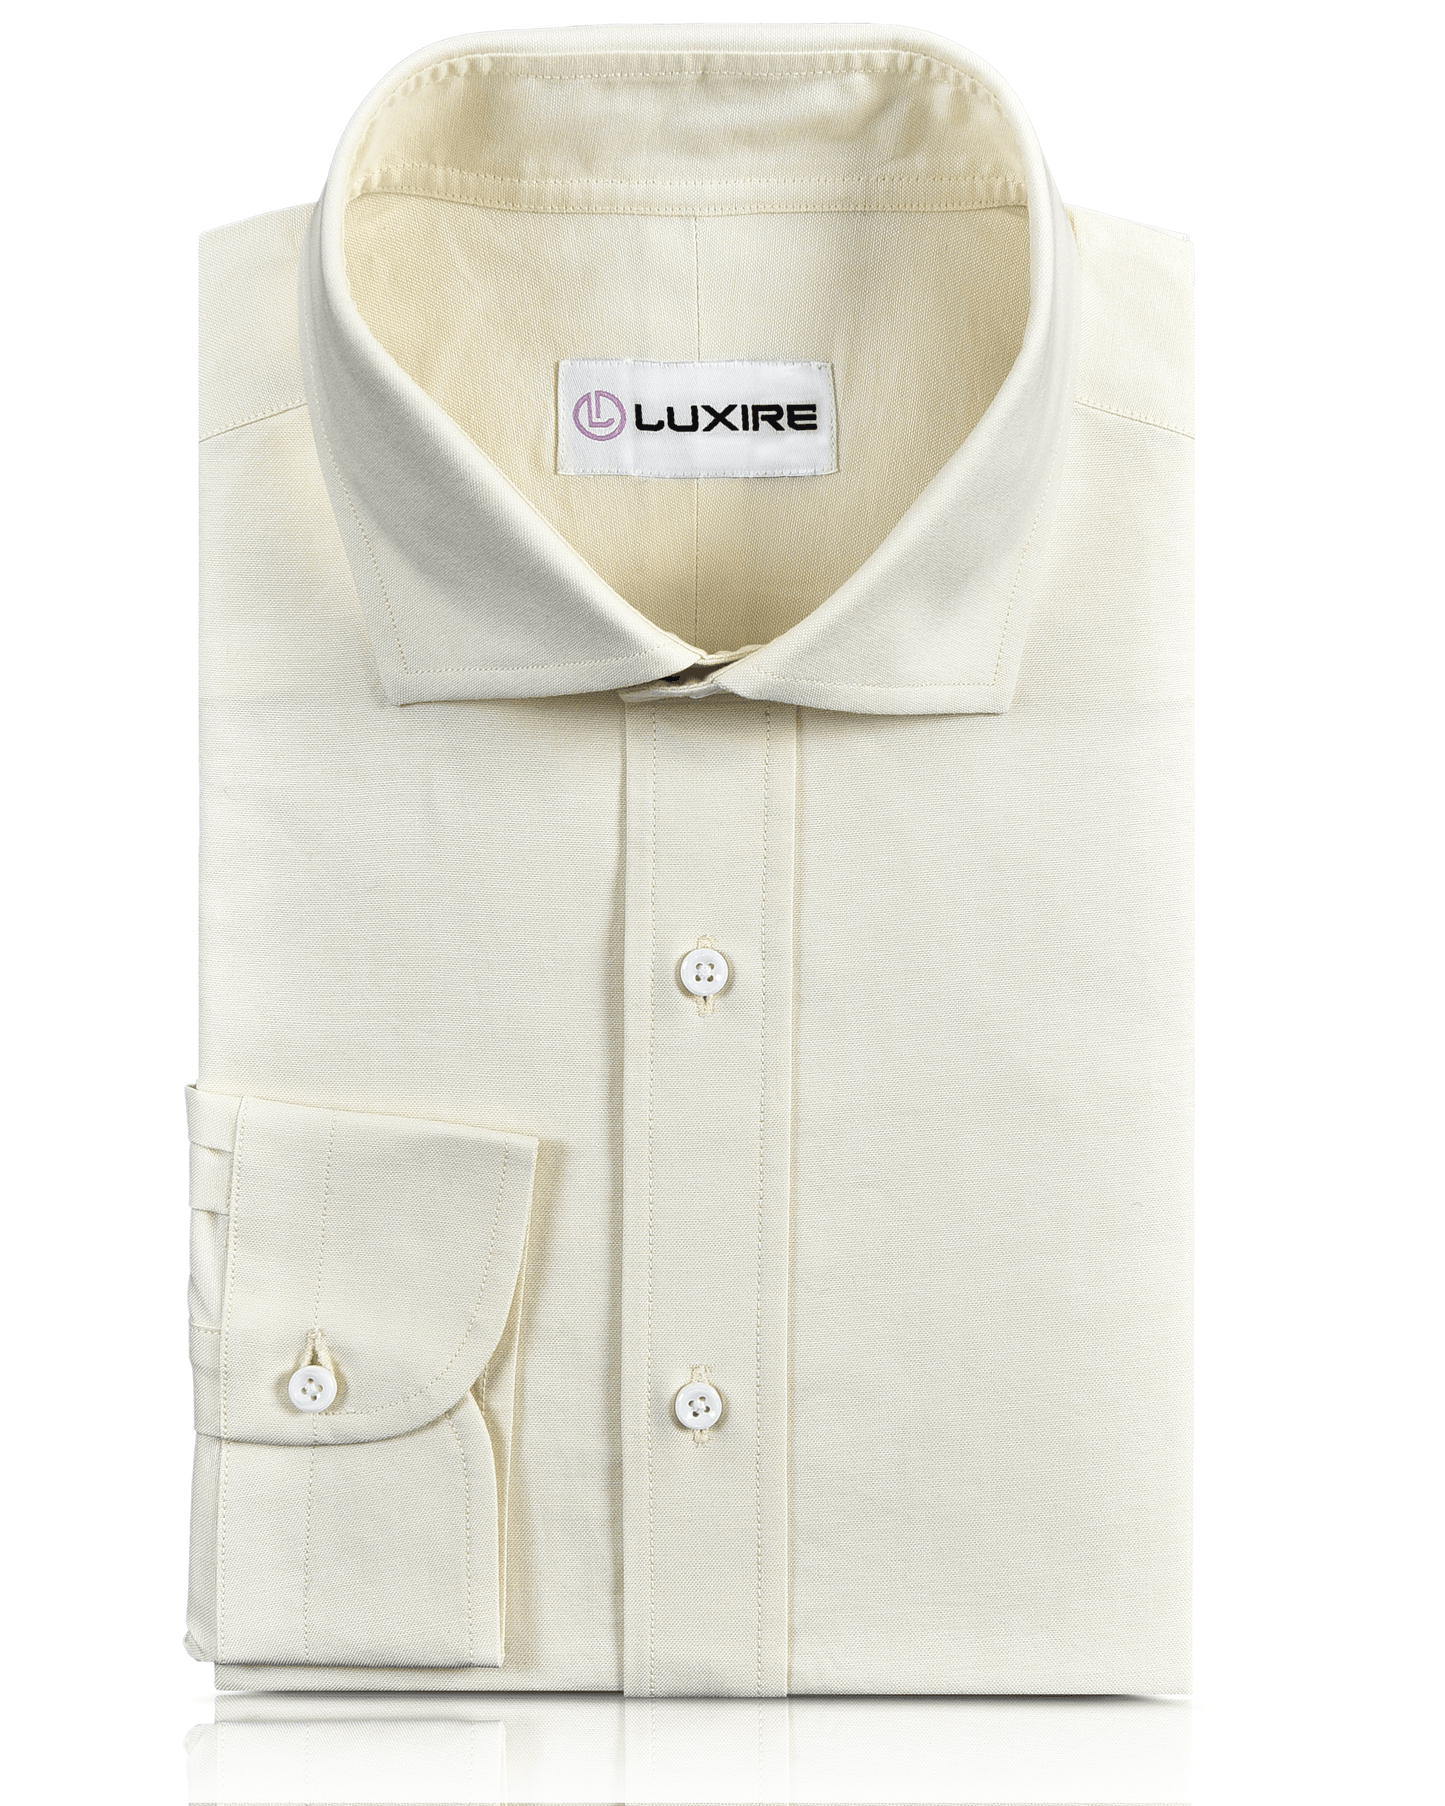 Front of the custom oxford shirt for men by Luxire in ecru pinpoint